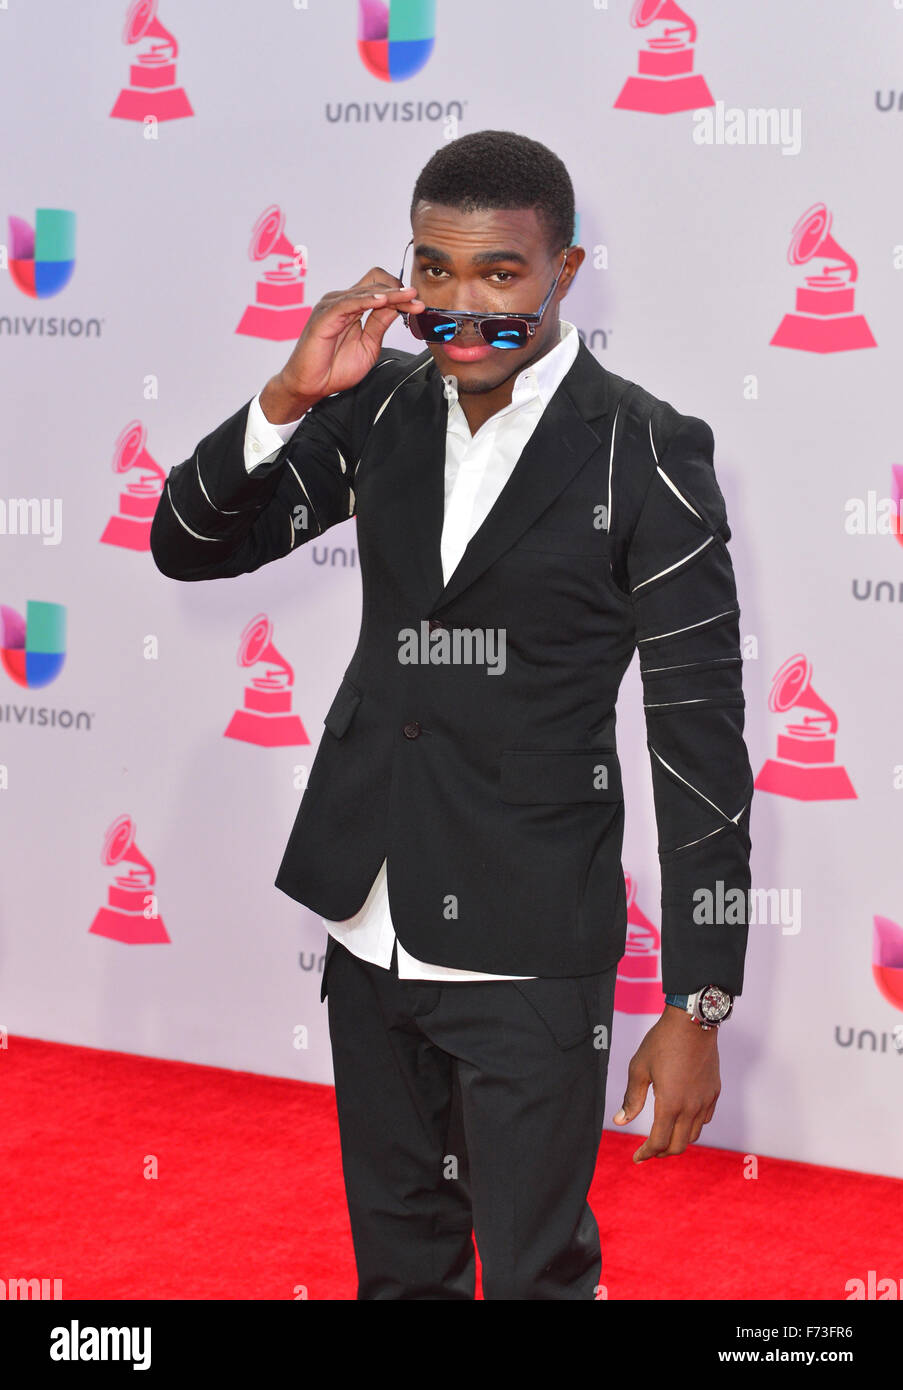 Singer OMI attends the 16th Annual Latin GRAMMY Awards in Las Vegas Stock Photo